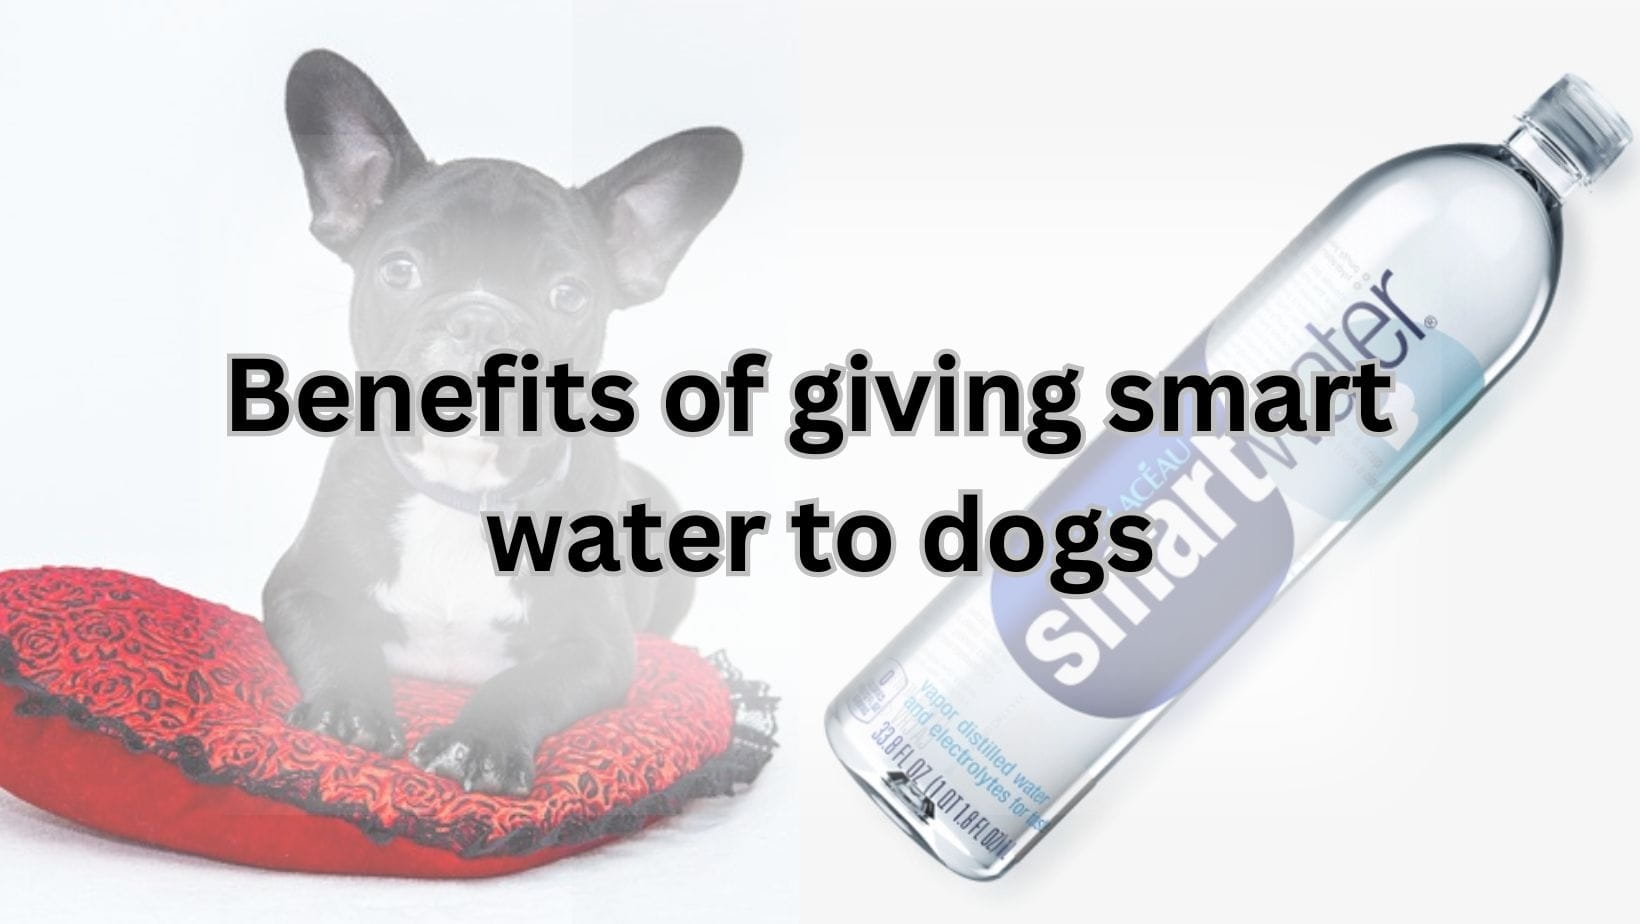 Smart water for dogs